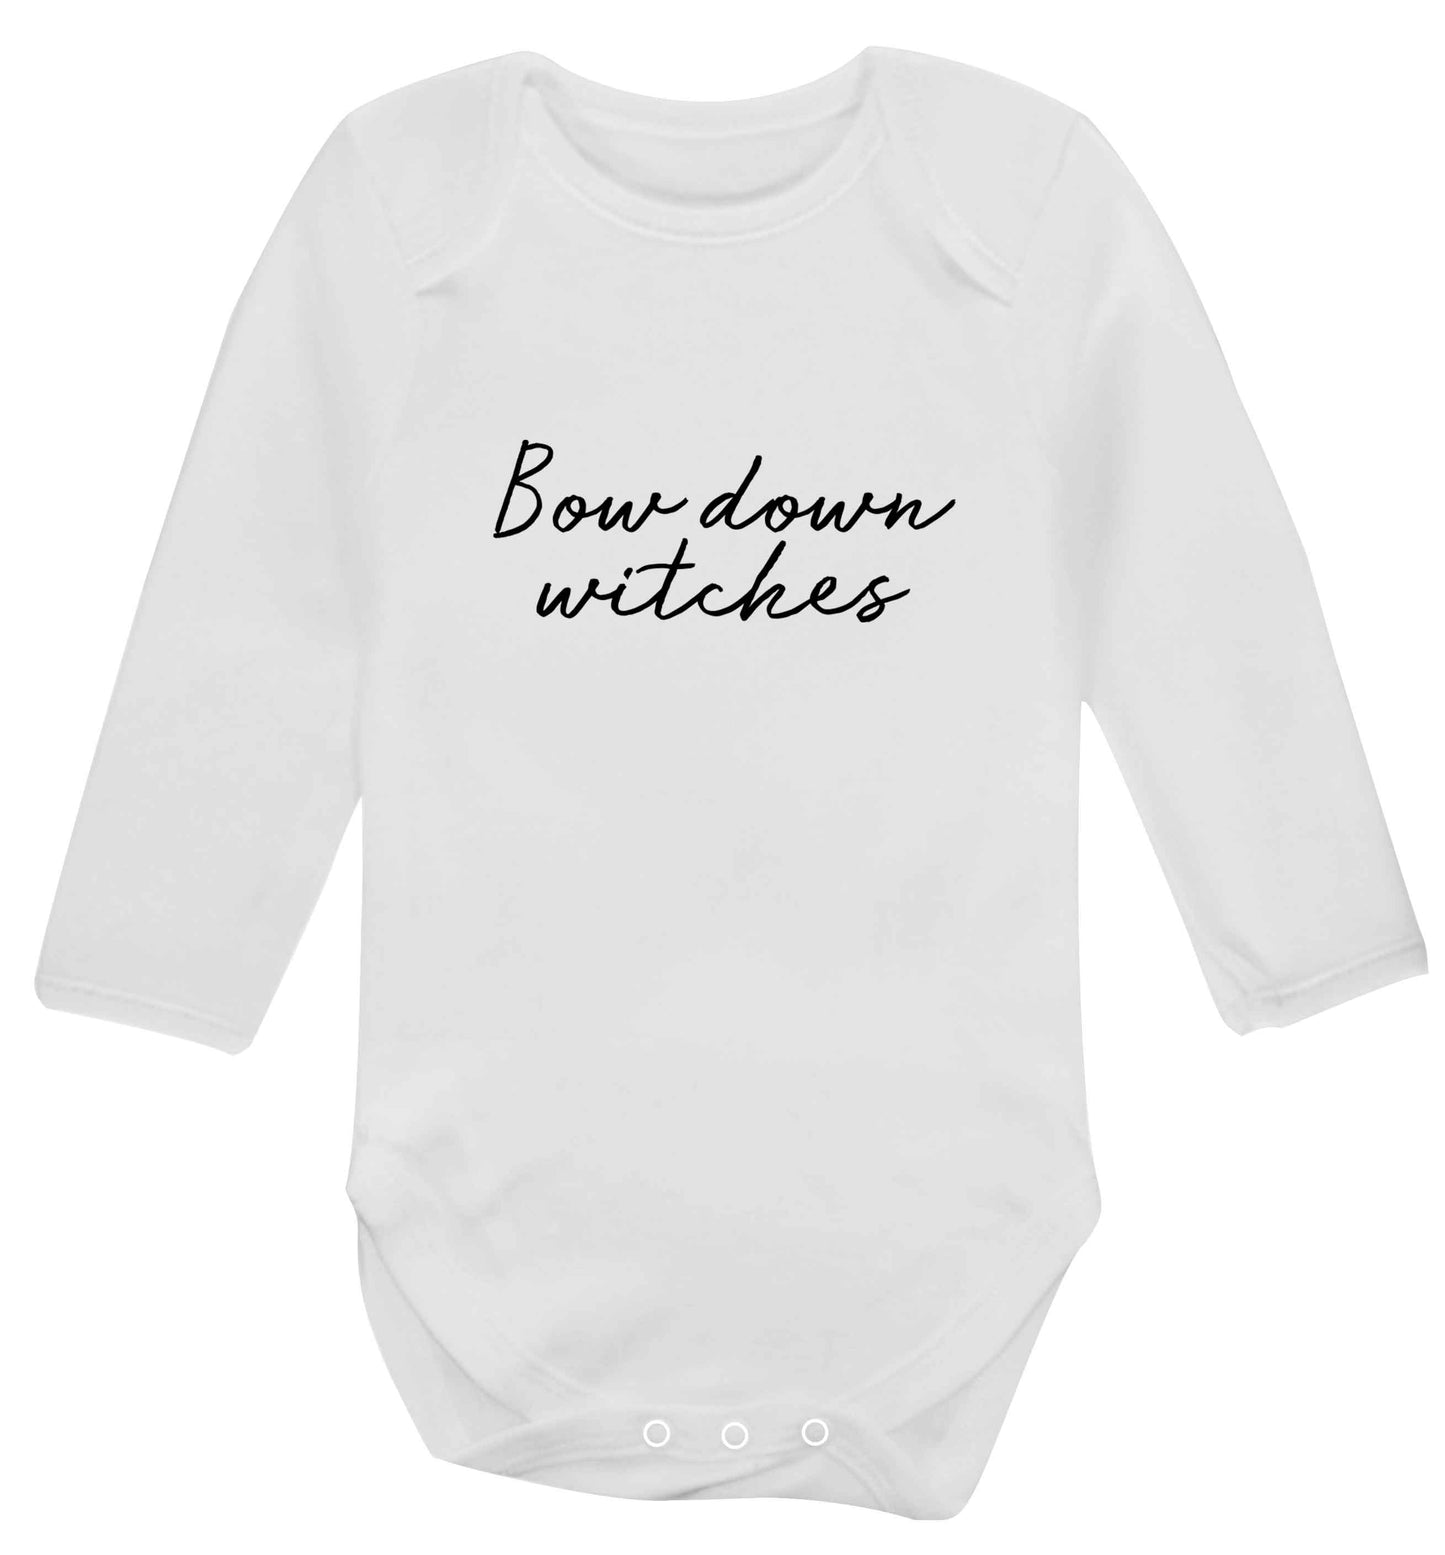 Bow down witches baby vest long sleeved white 6-12 months